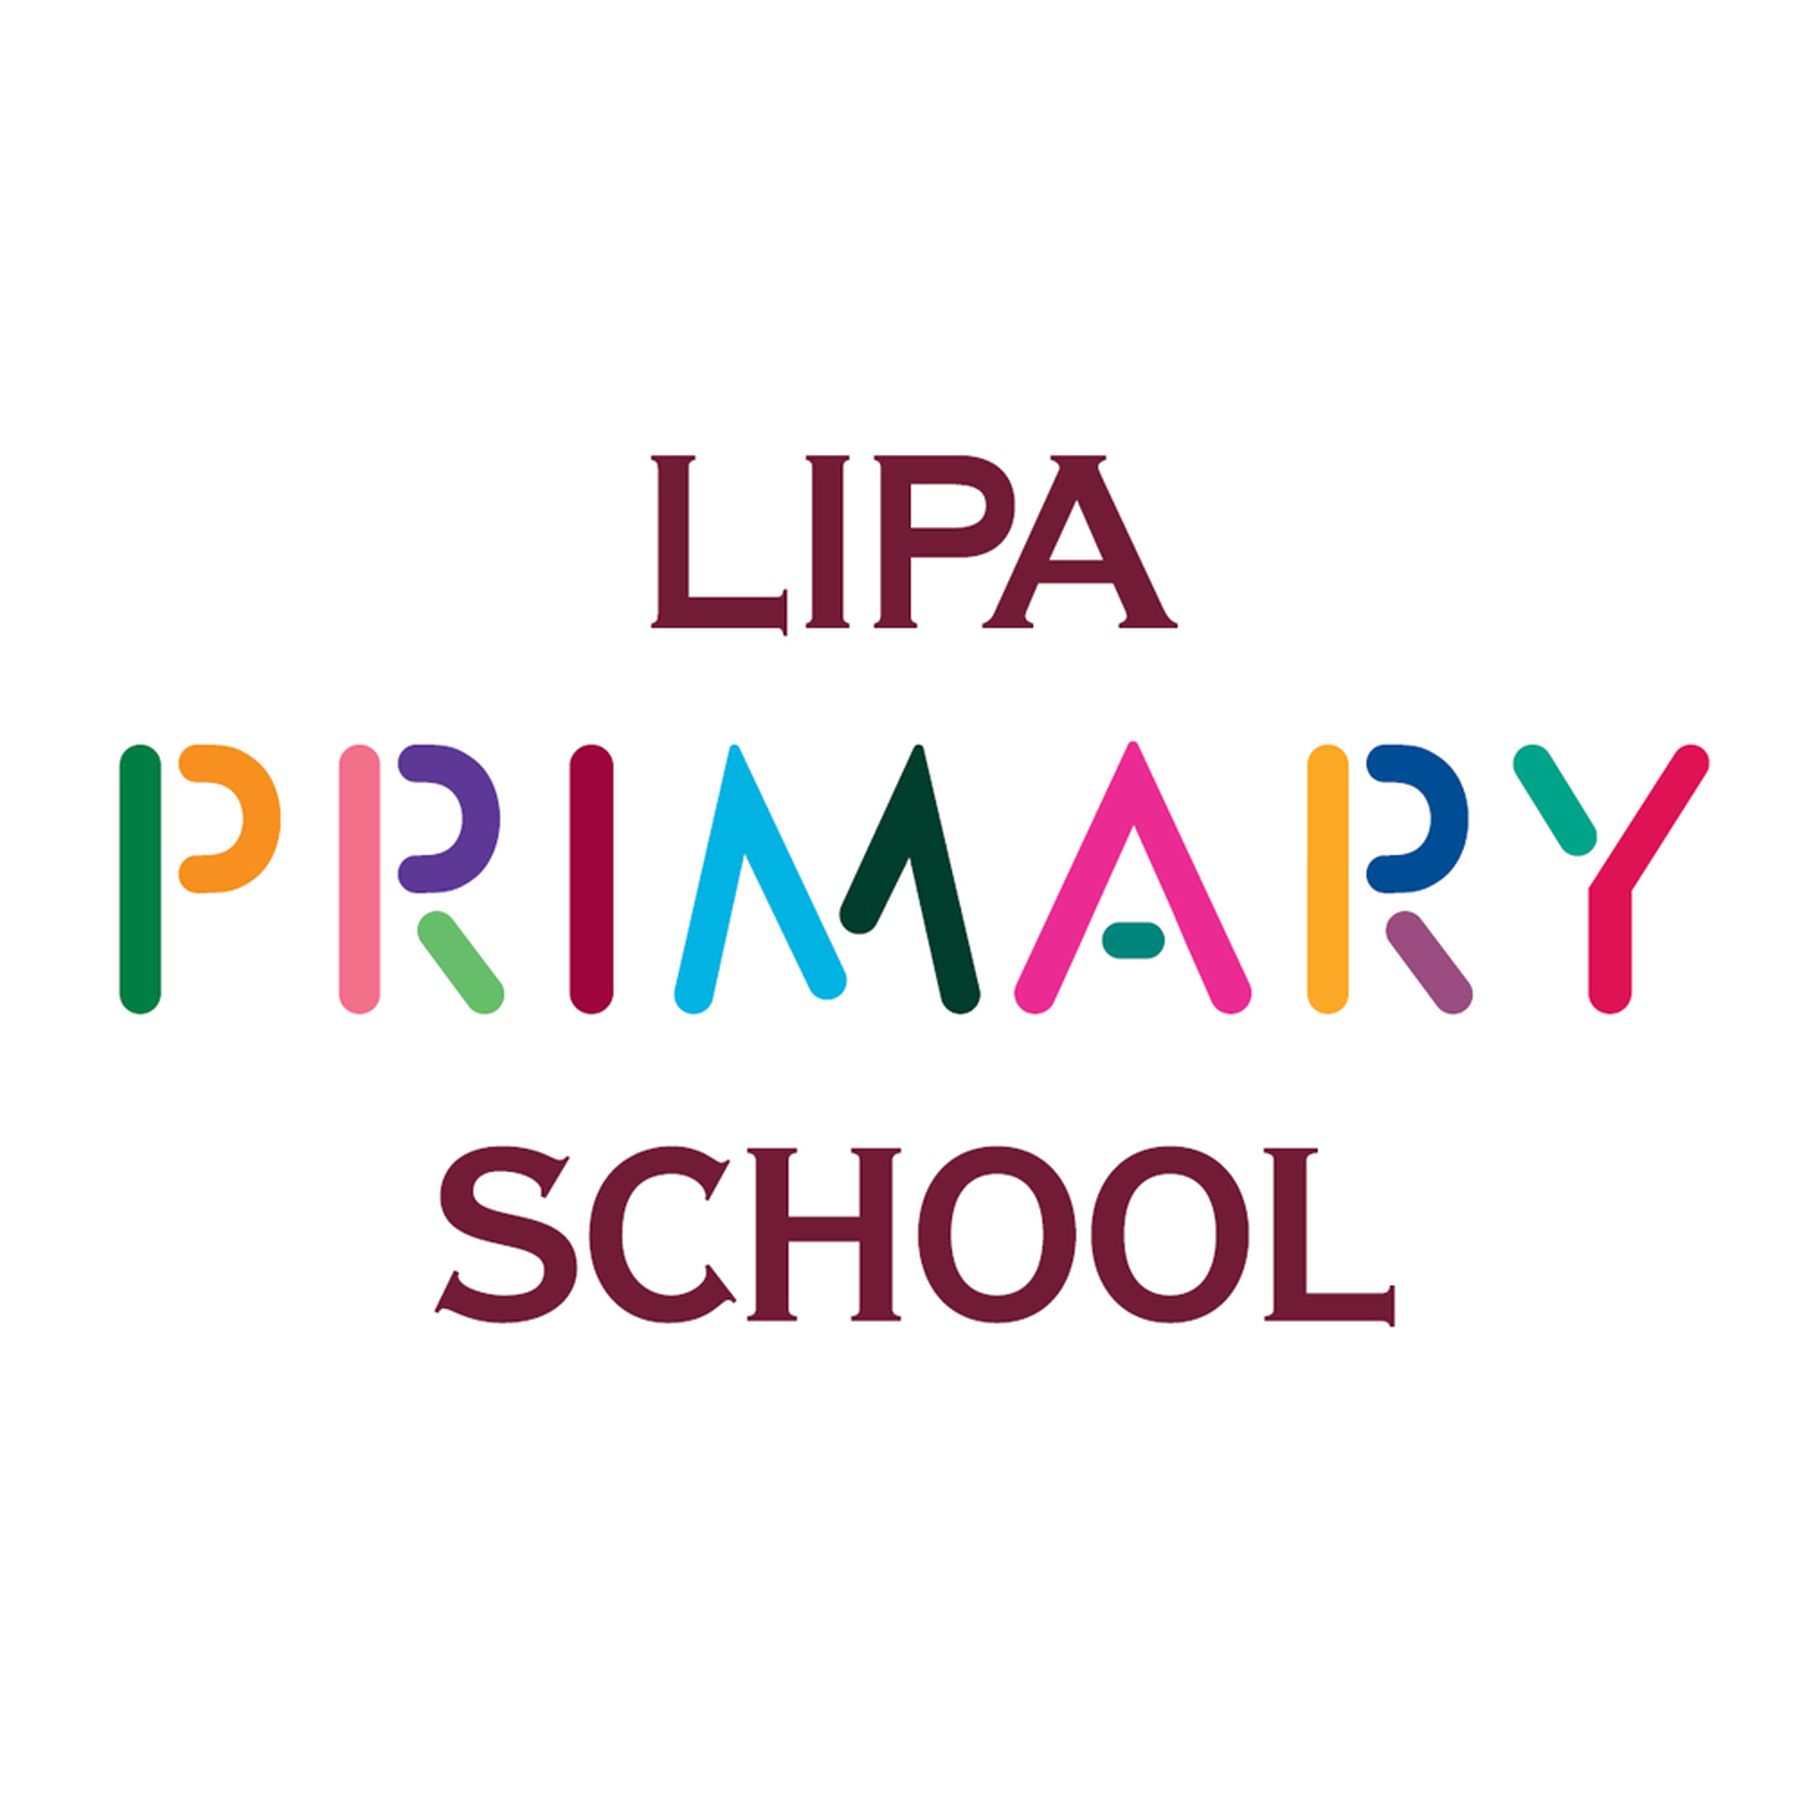 LIPA Primary School wants to extend teaching to Year 11